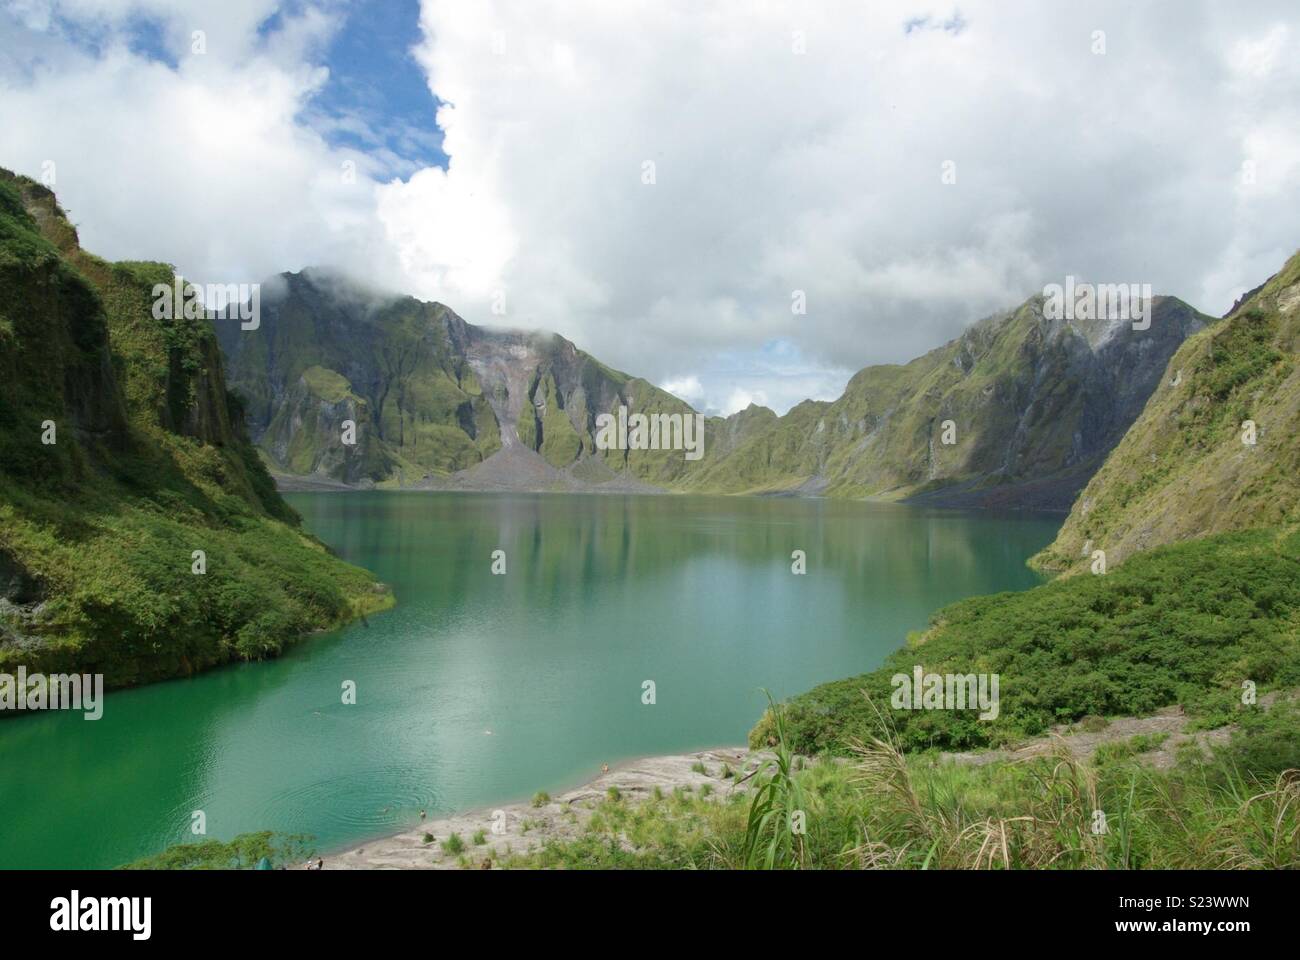 Volcanic Lake in the Philippines Stock Photo